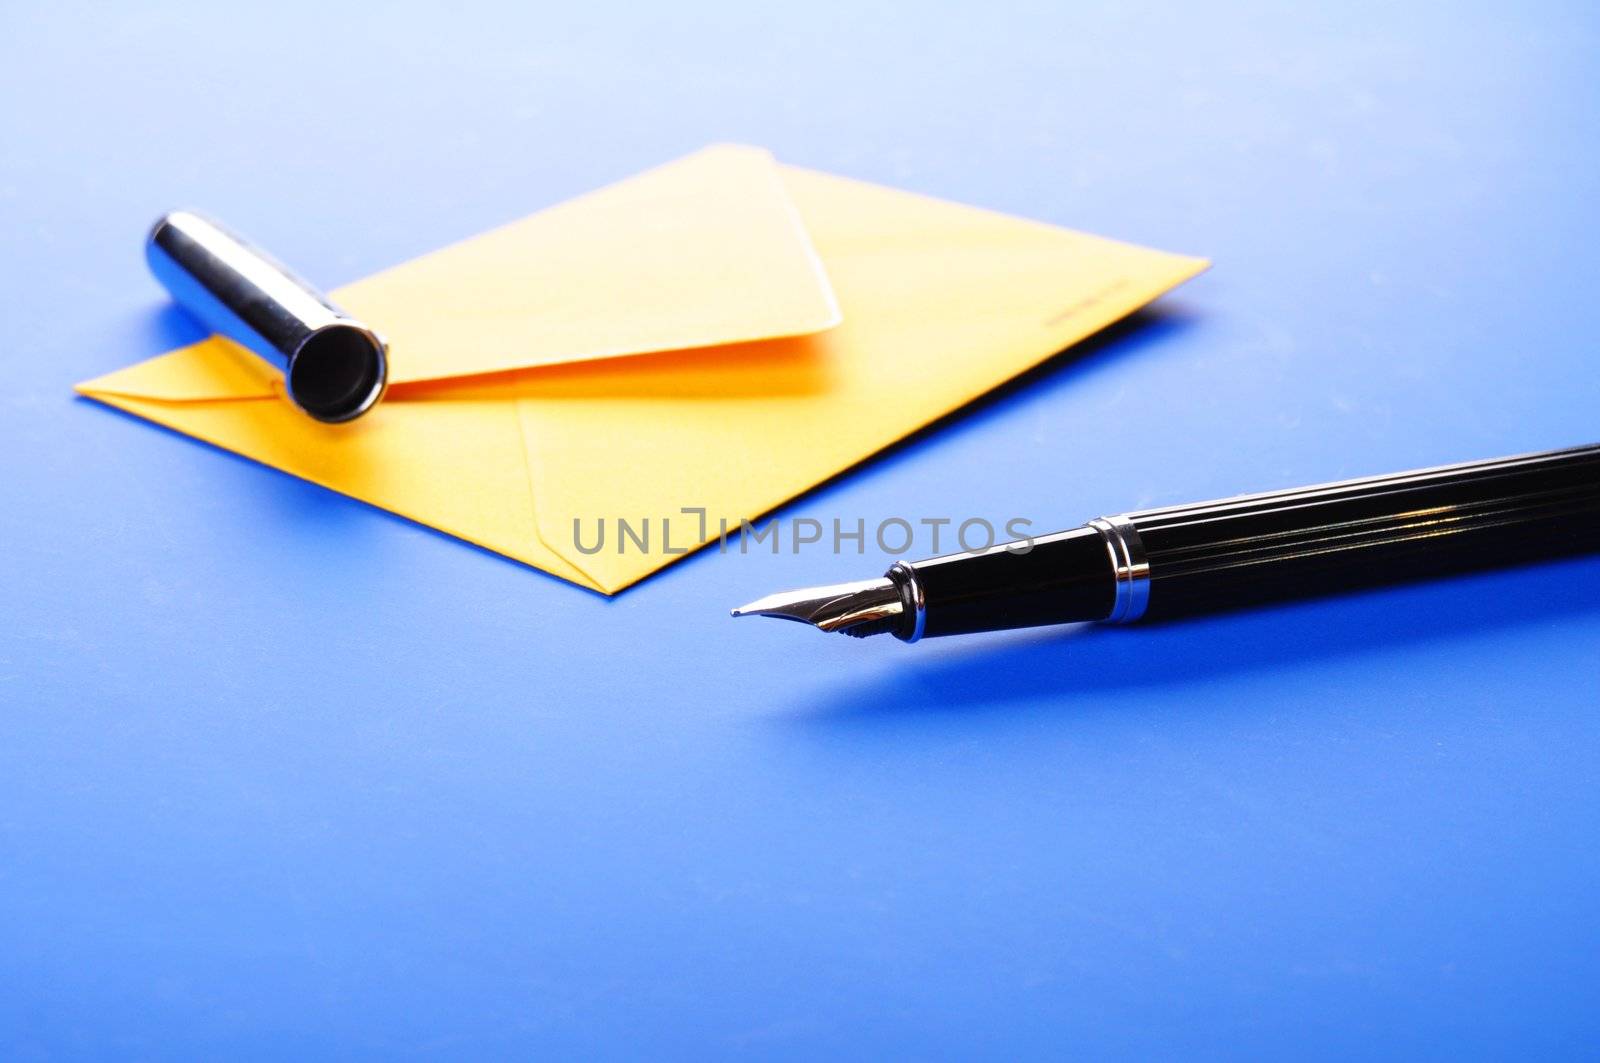 envelop and pen showing mail or communication concept